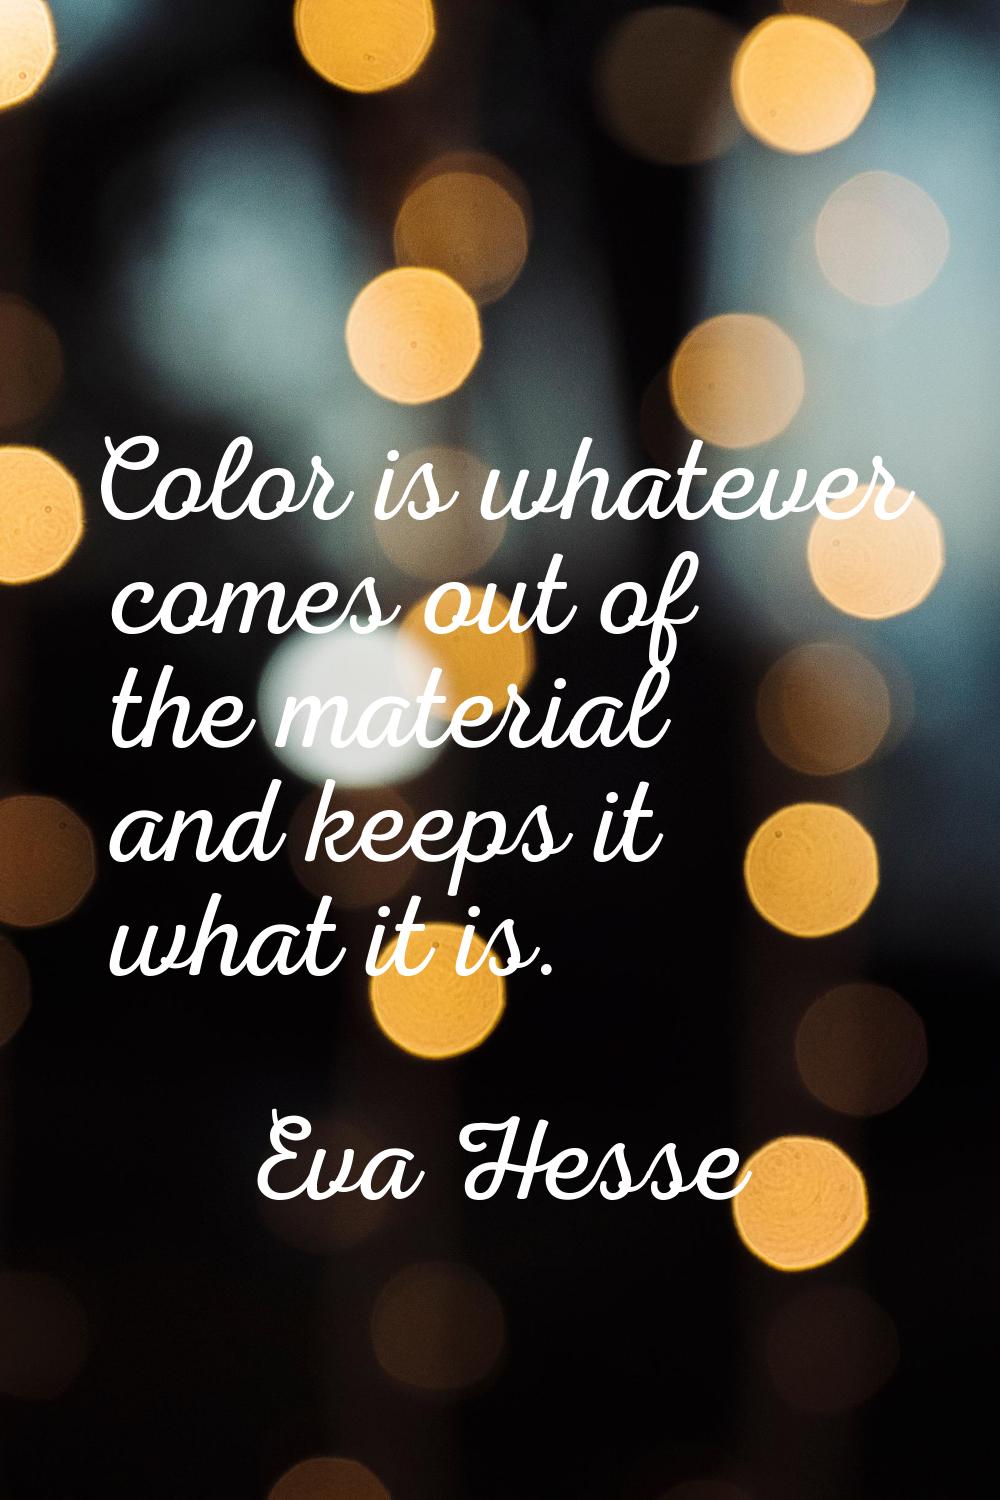 Color is whatever comes out of the material and keeps it what it is.